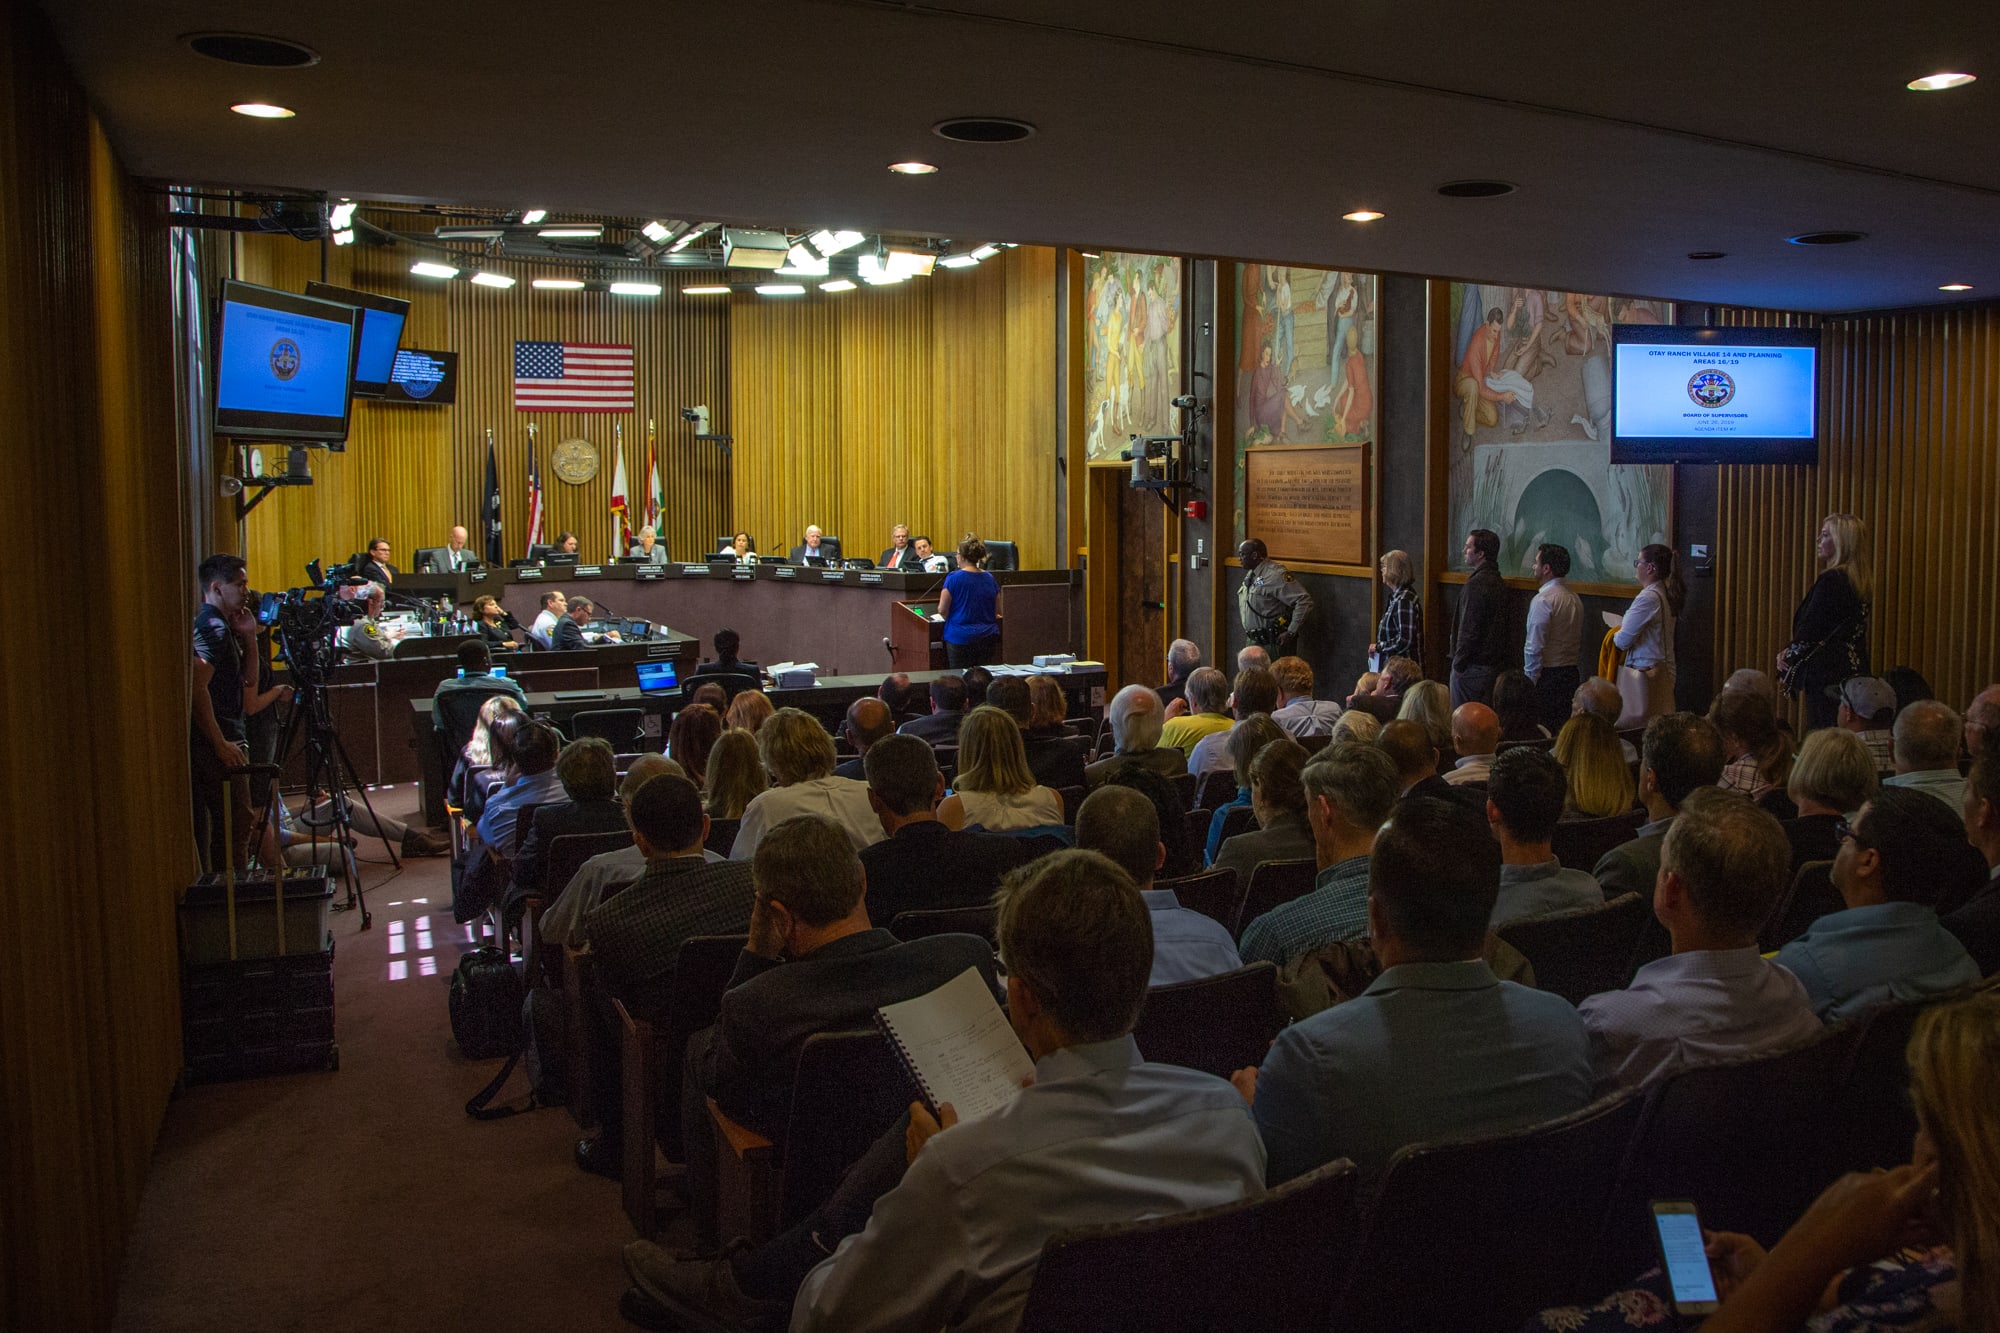 San Diego County residents line up to comment on a proposed housing development in an area that has burned every seven years on average since 1950. The development was approved. (Kailey Broussard/News21)